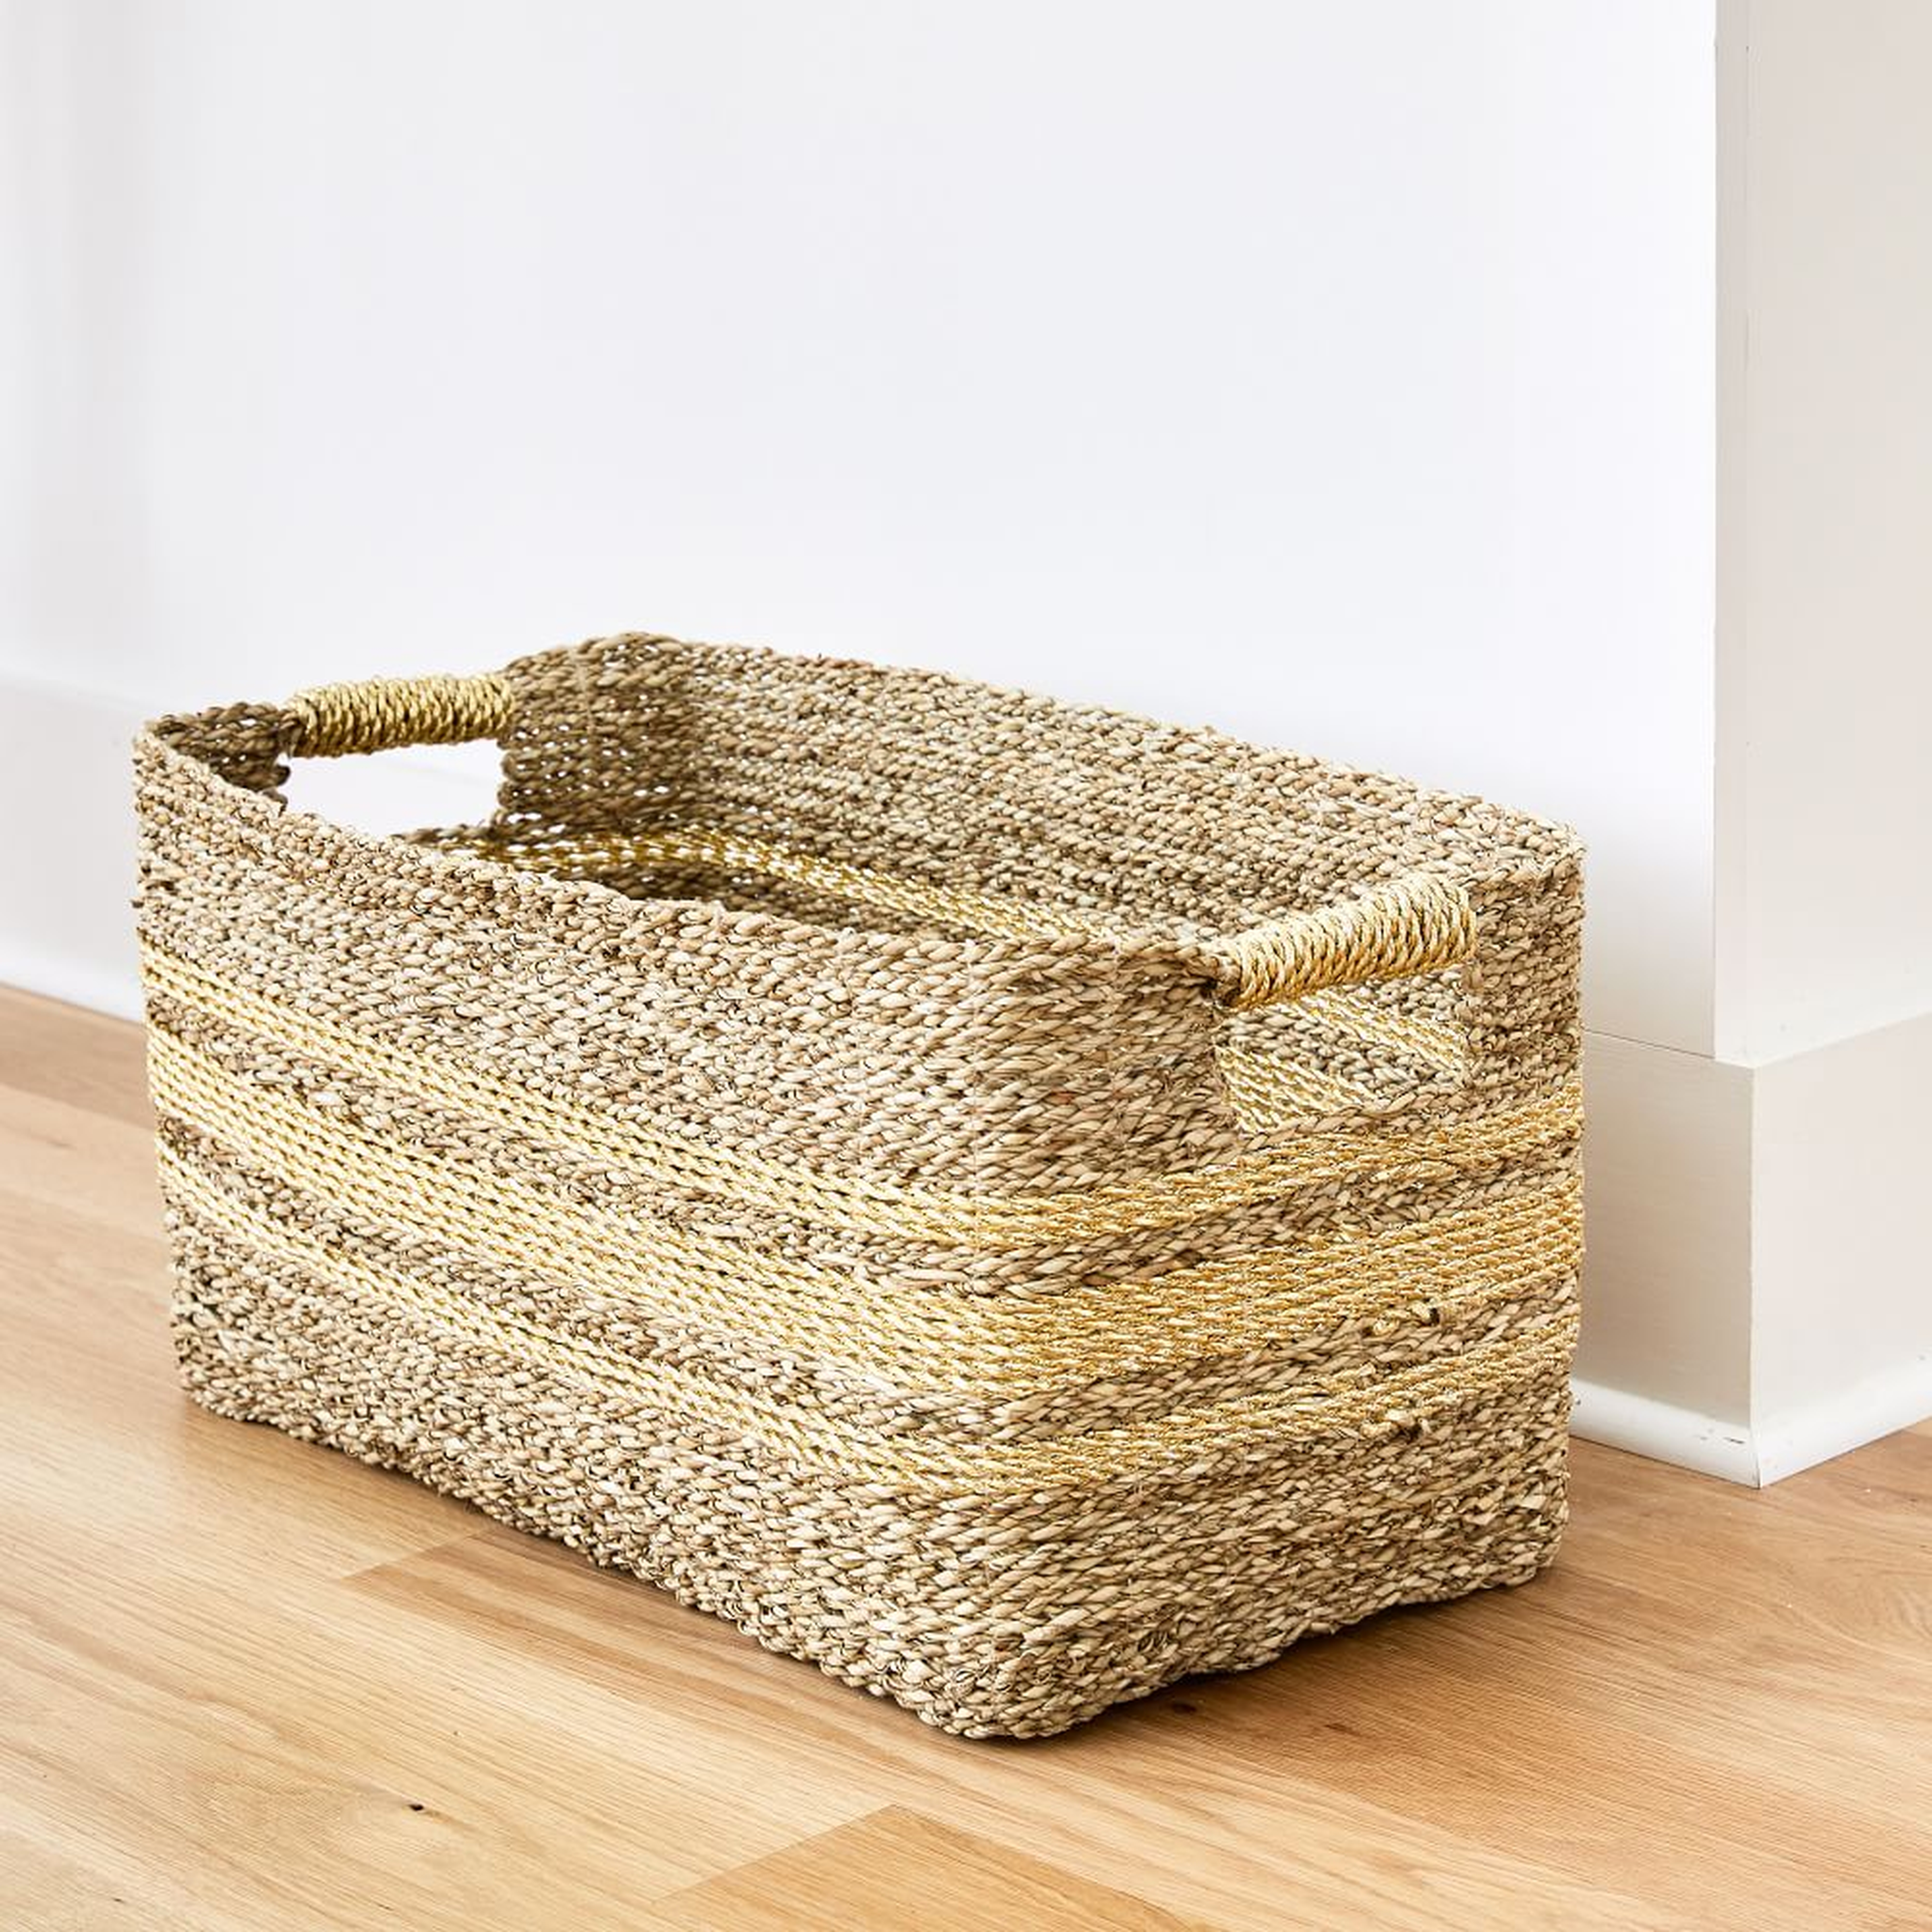 Two Tone Metallic Woven Console, Natural & Gold, Seagrass - West Elm